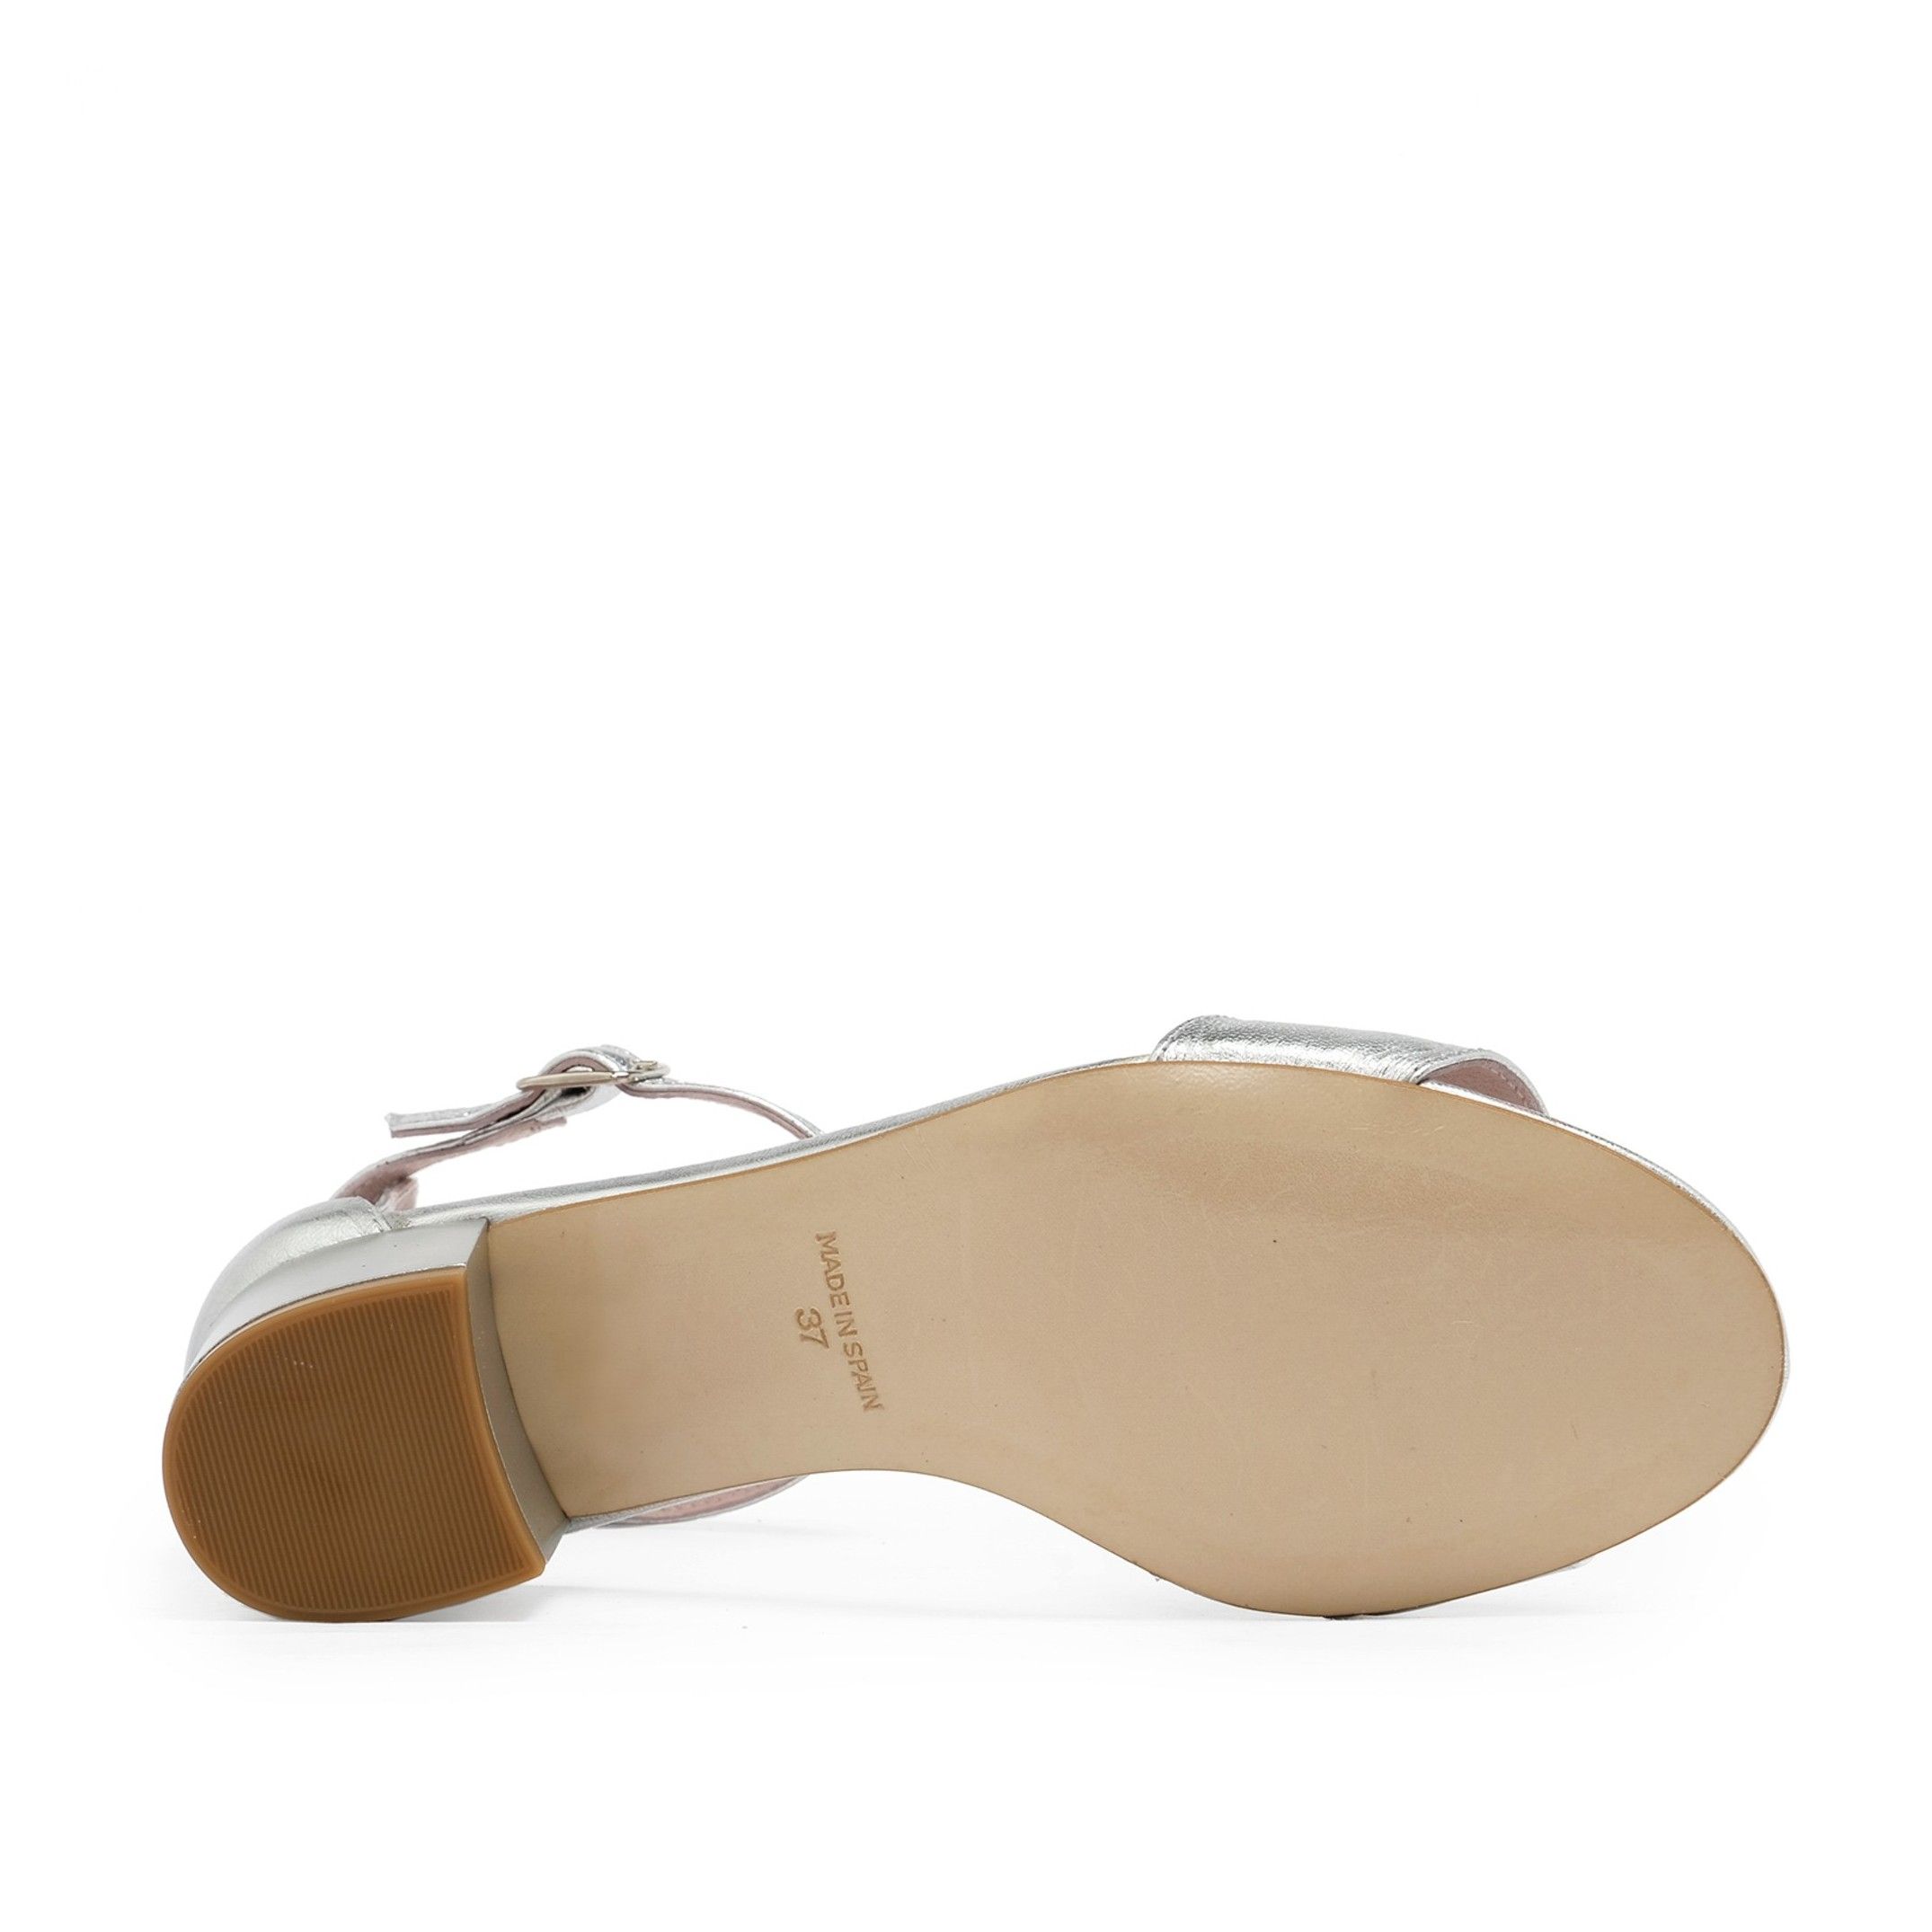 Classic sandals with heel for women. By Eva Lopez. Upper: goat leather. Closure: Metal buckle. Inner lining and insole: pig lining. Sole material: Cuerolite. Heel height: 4.5 cm. Designed and manufactured in Spain.